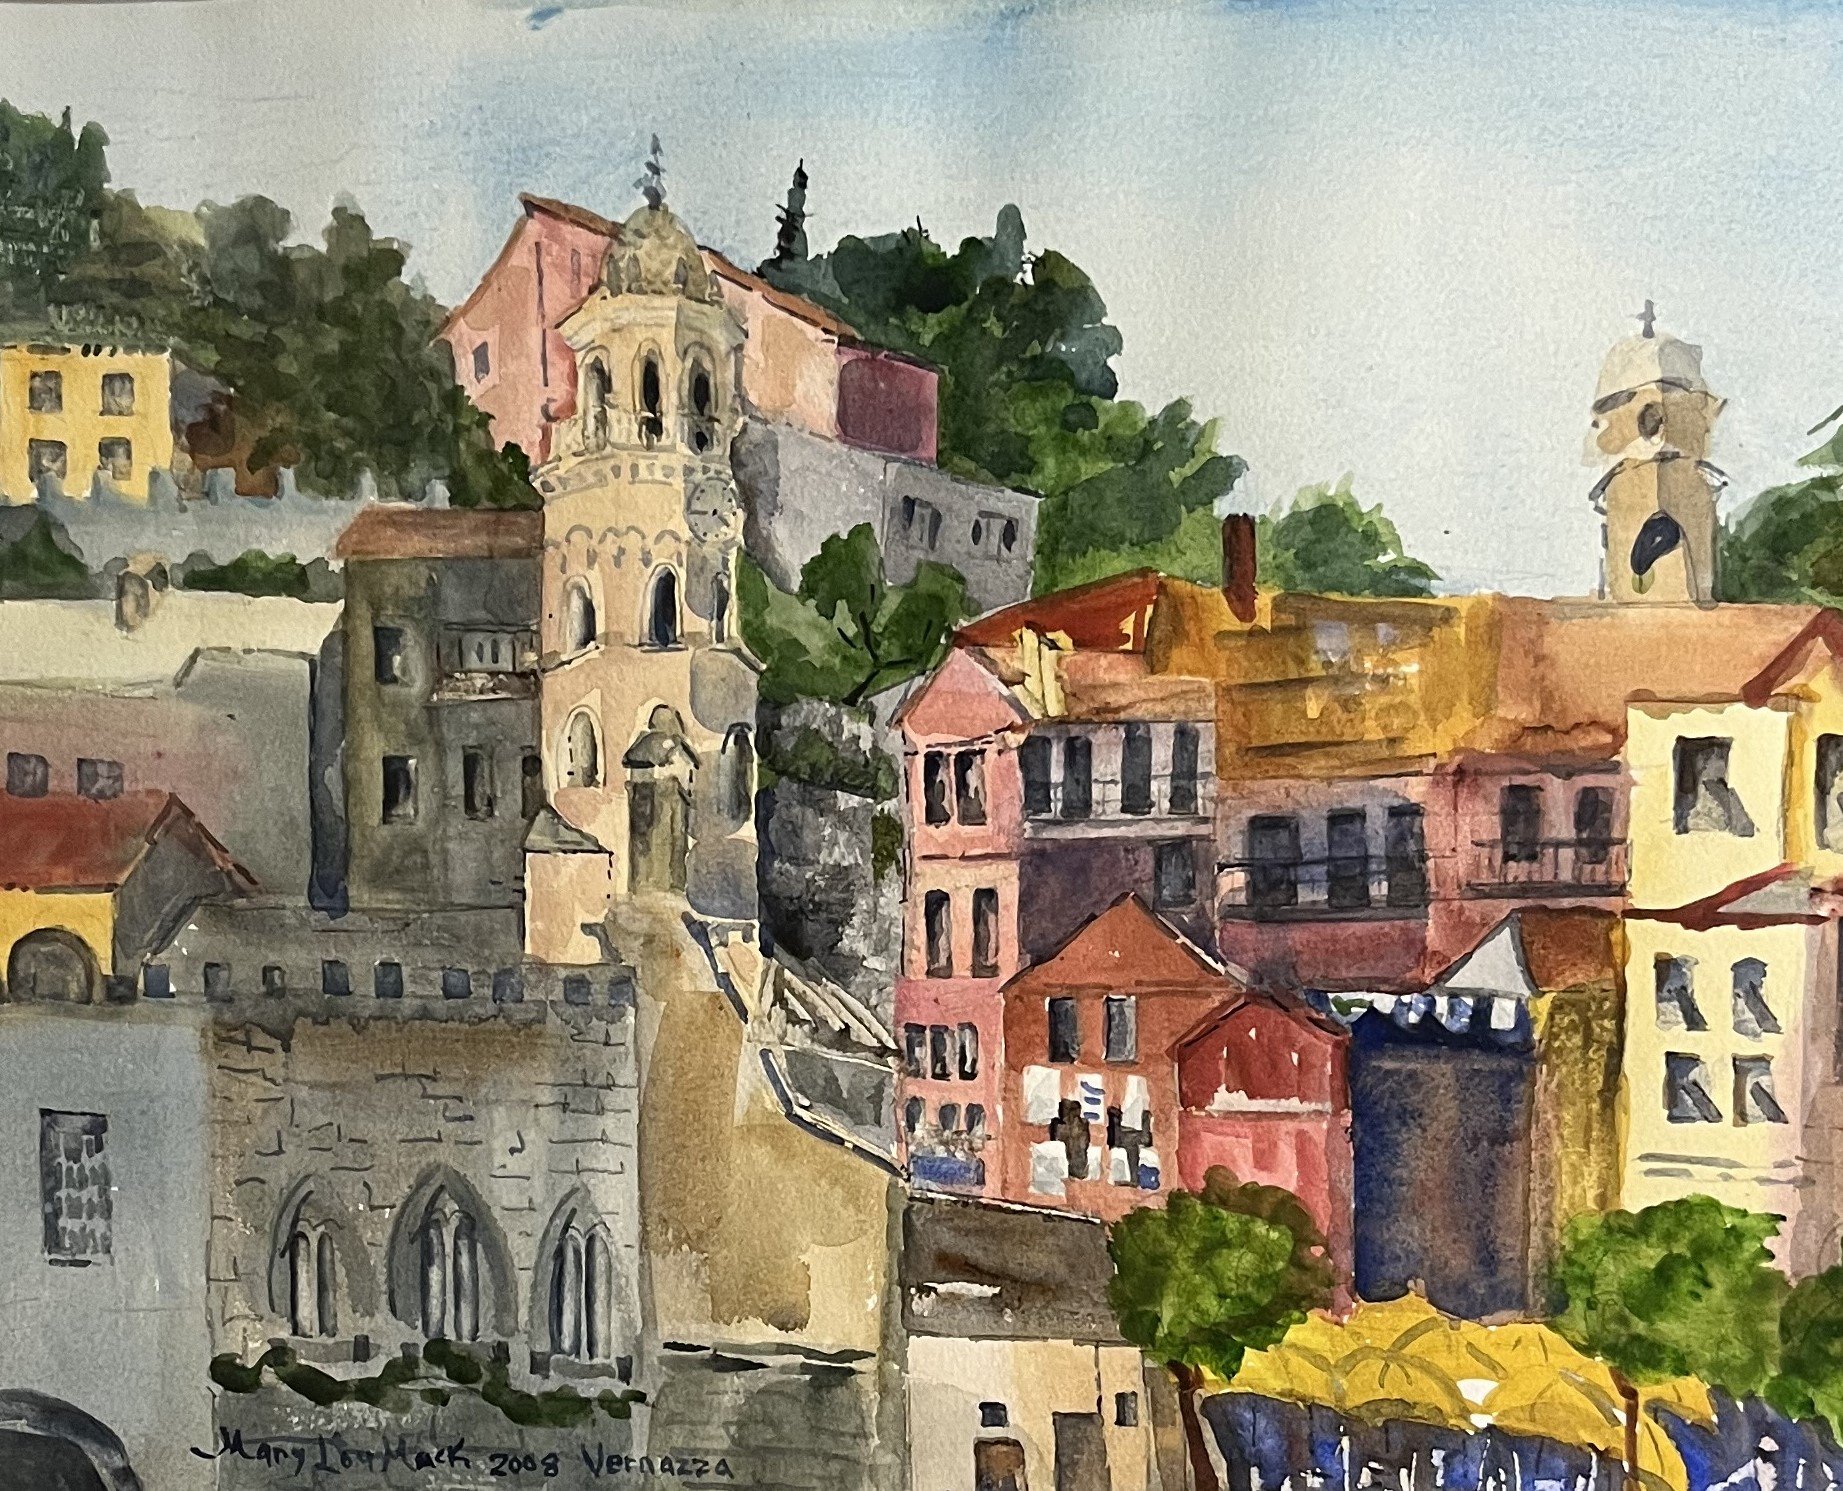 🎨🌟 Join the mesmerizing world of watercolor with Mary Lou Mack! 

📅 Mark your calendars for May 1, 8, 15, and 22! 
📅Every Wednesday from 12:30 PM to 3:30 PM

🖌️ Join Mary Lou Mack for a fun watercolor class designed especially for beginners! Whe